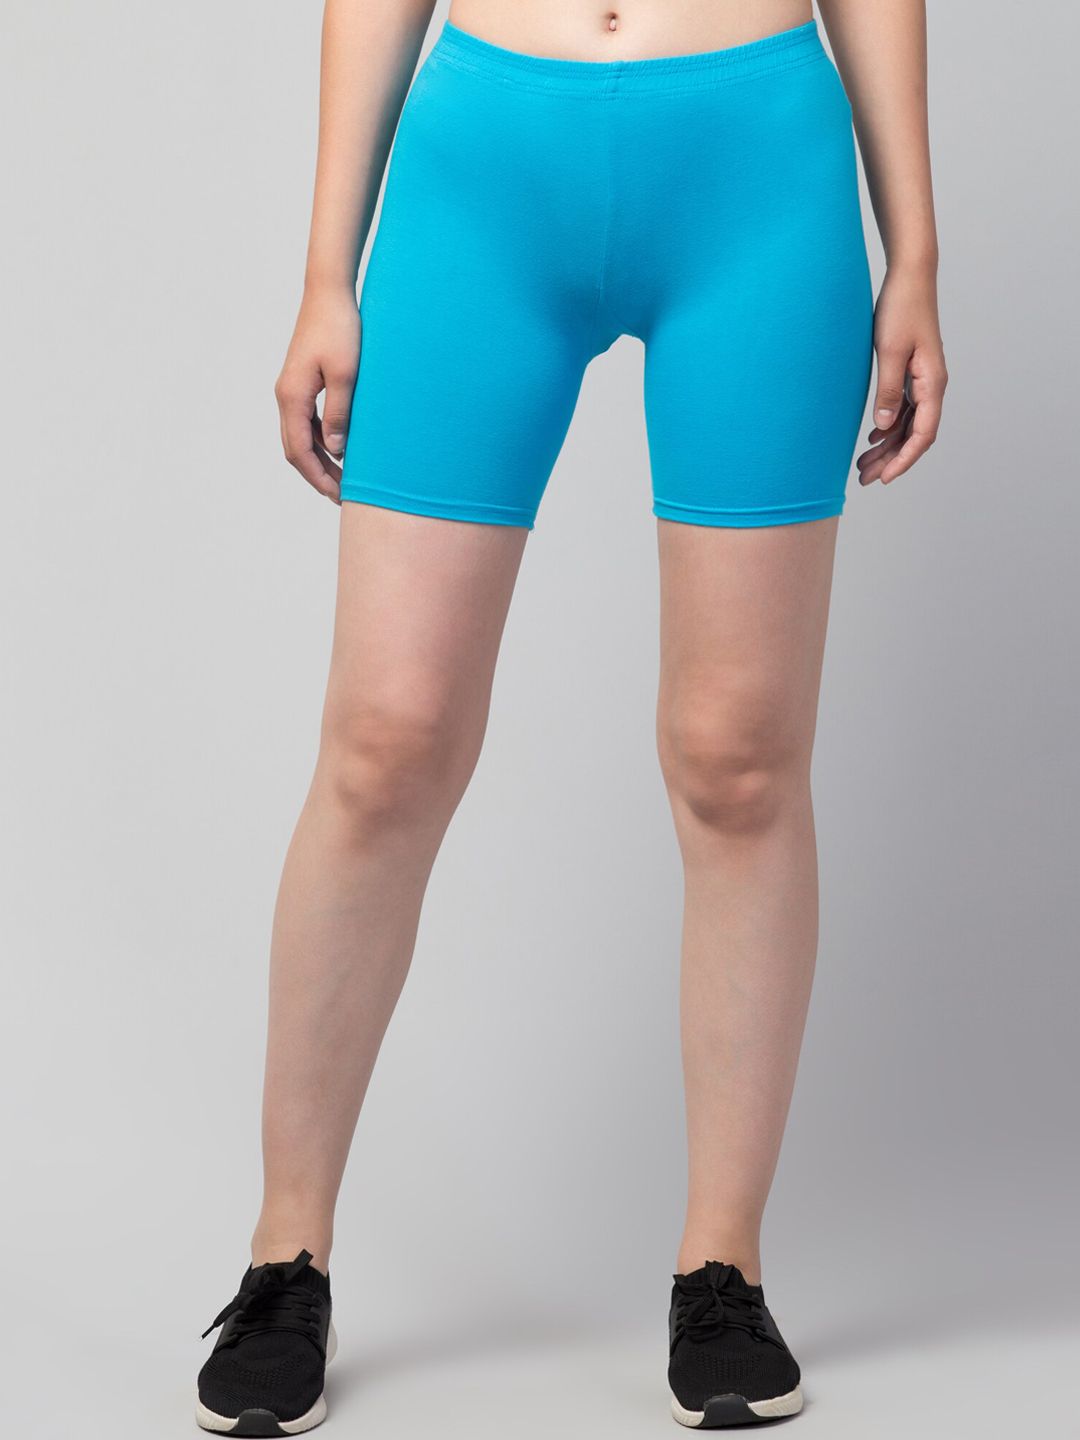 Apraa & Parma Women Blue Slim Fit Cotton Cycling Sports Shorts Price in India